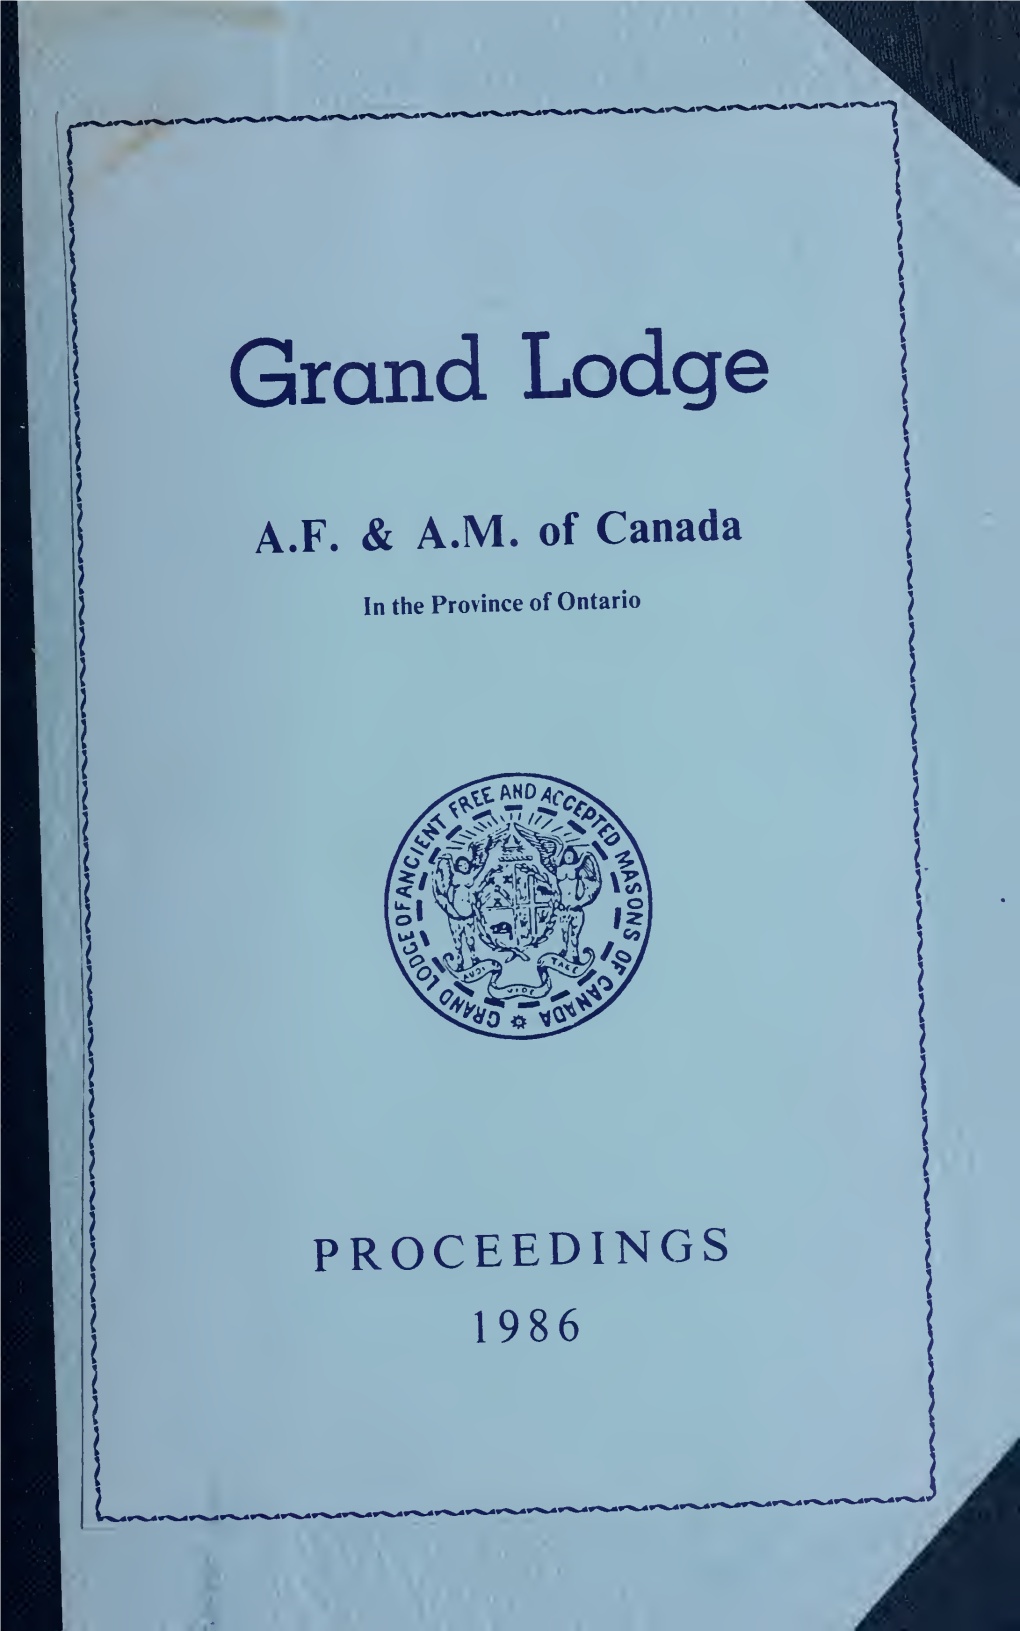 Grand Lodge of AF & AM of Canada, 1986